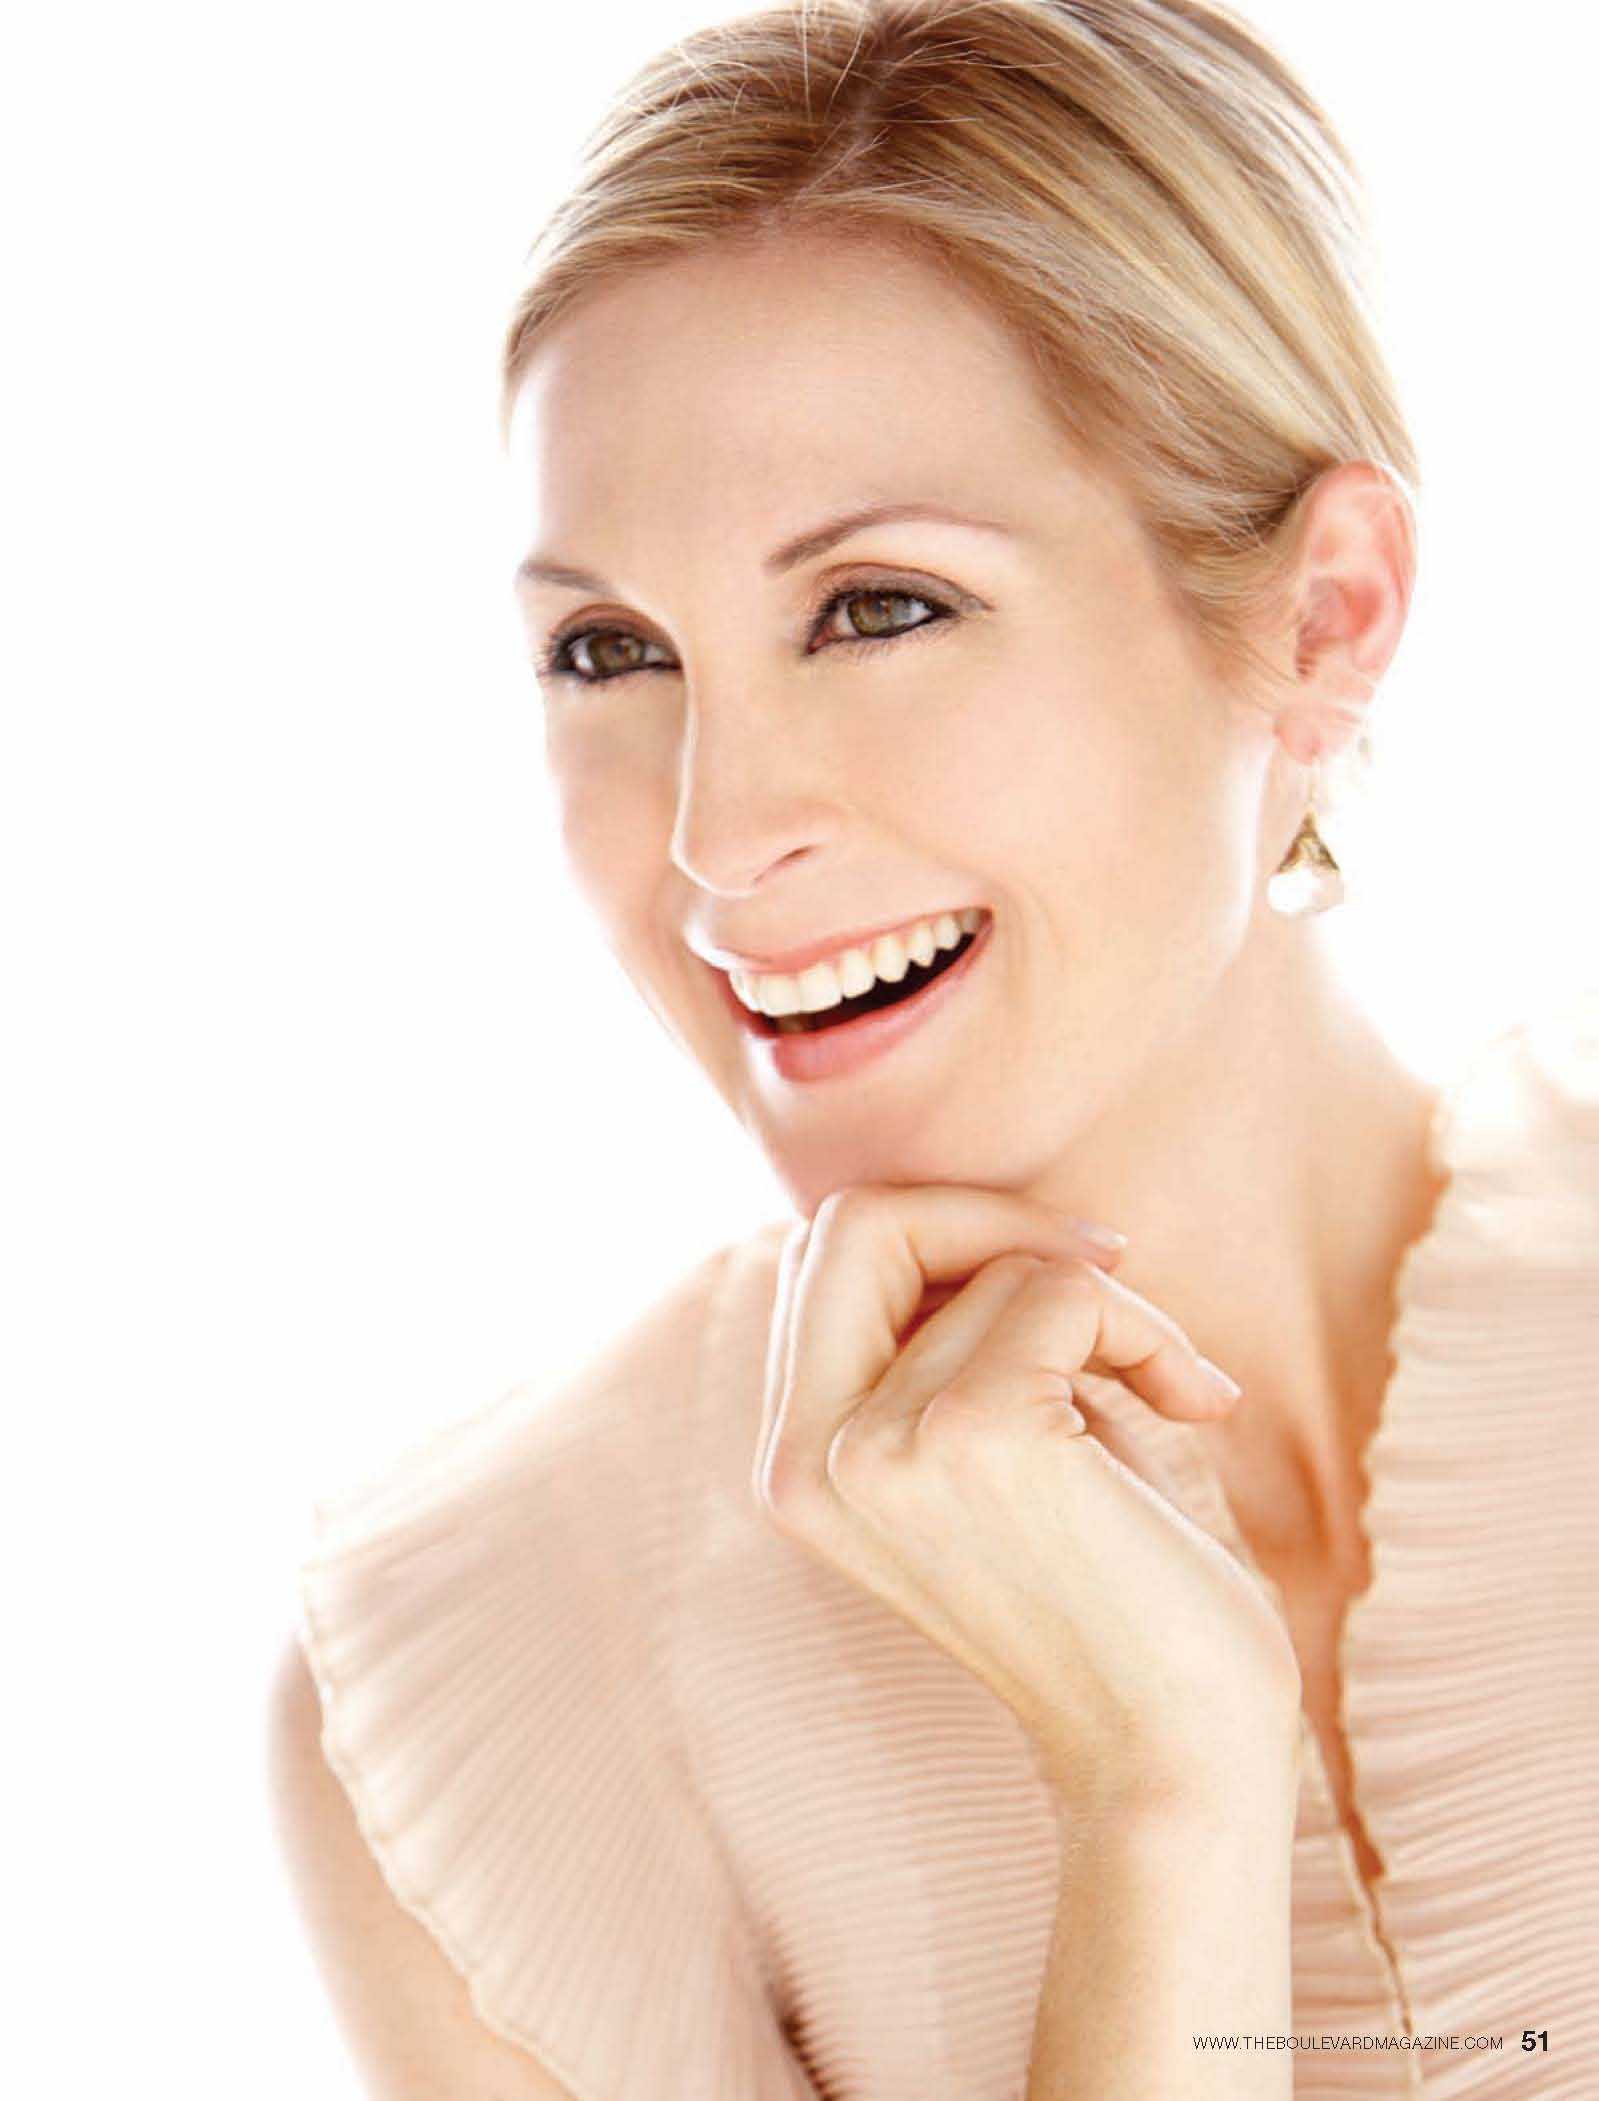 Келли Разерфорд (Kelly Rutherford)